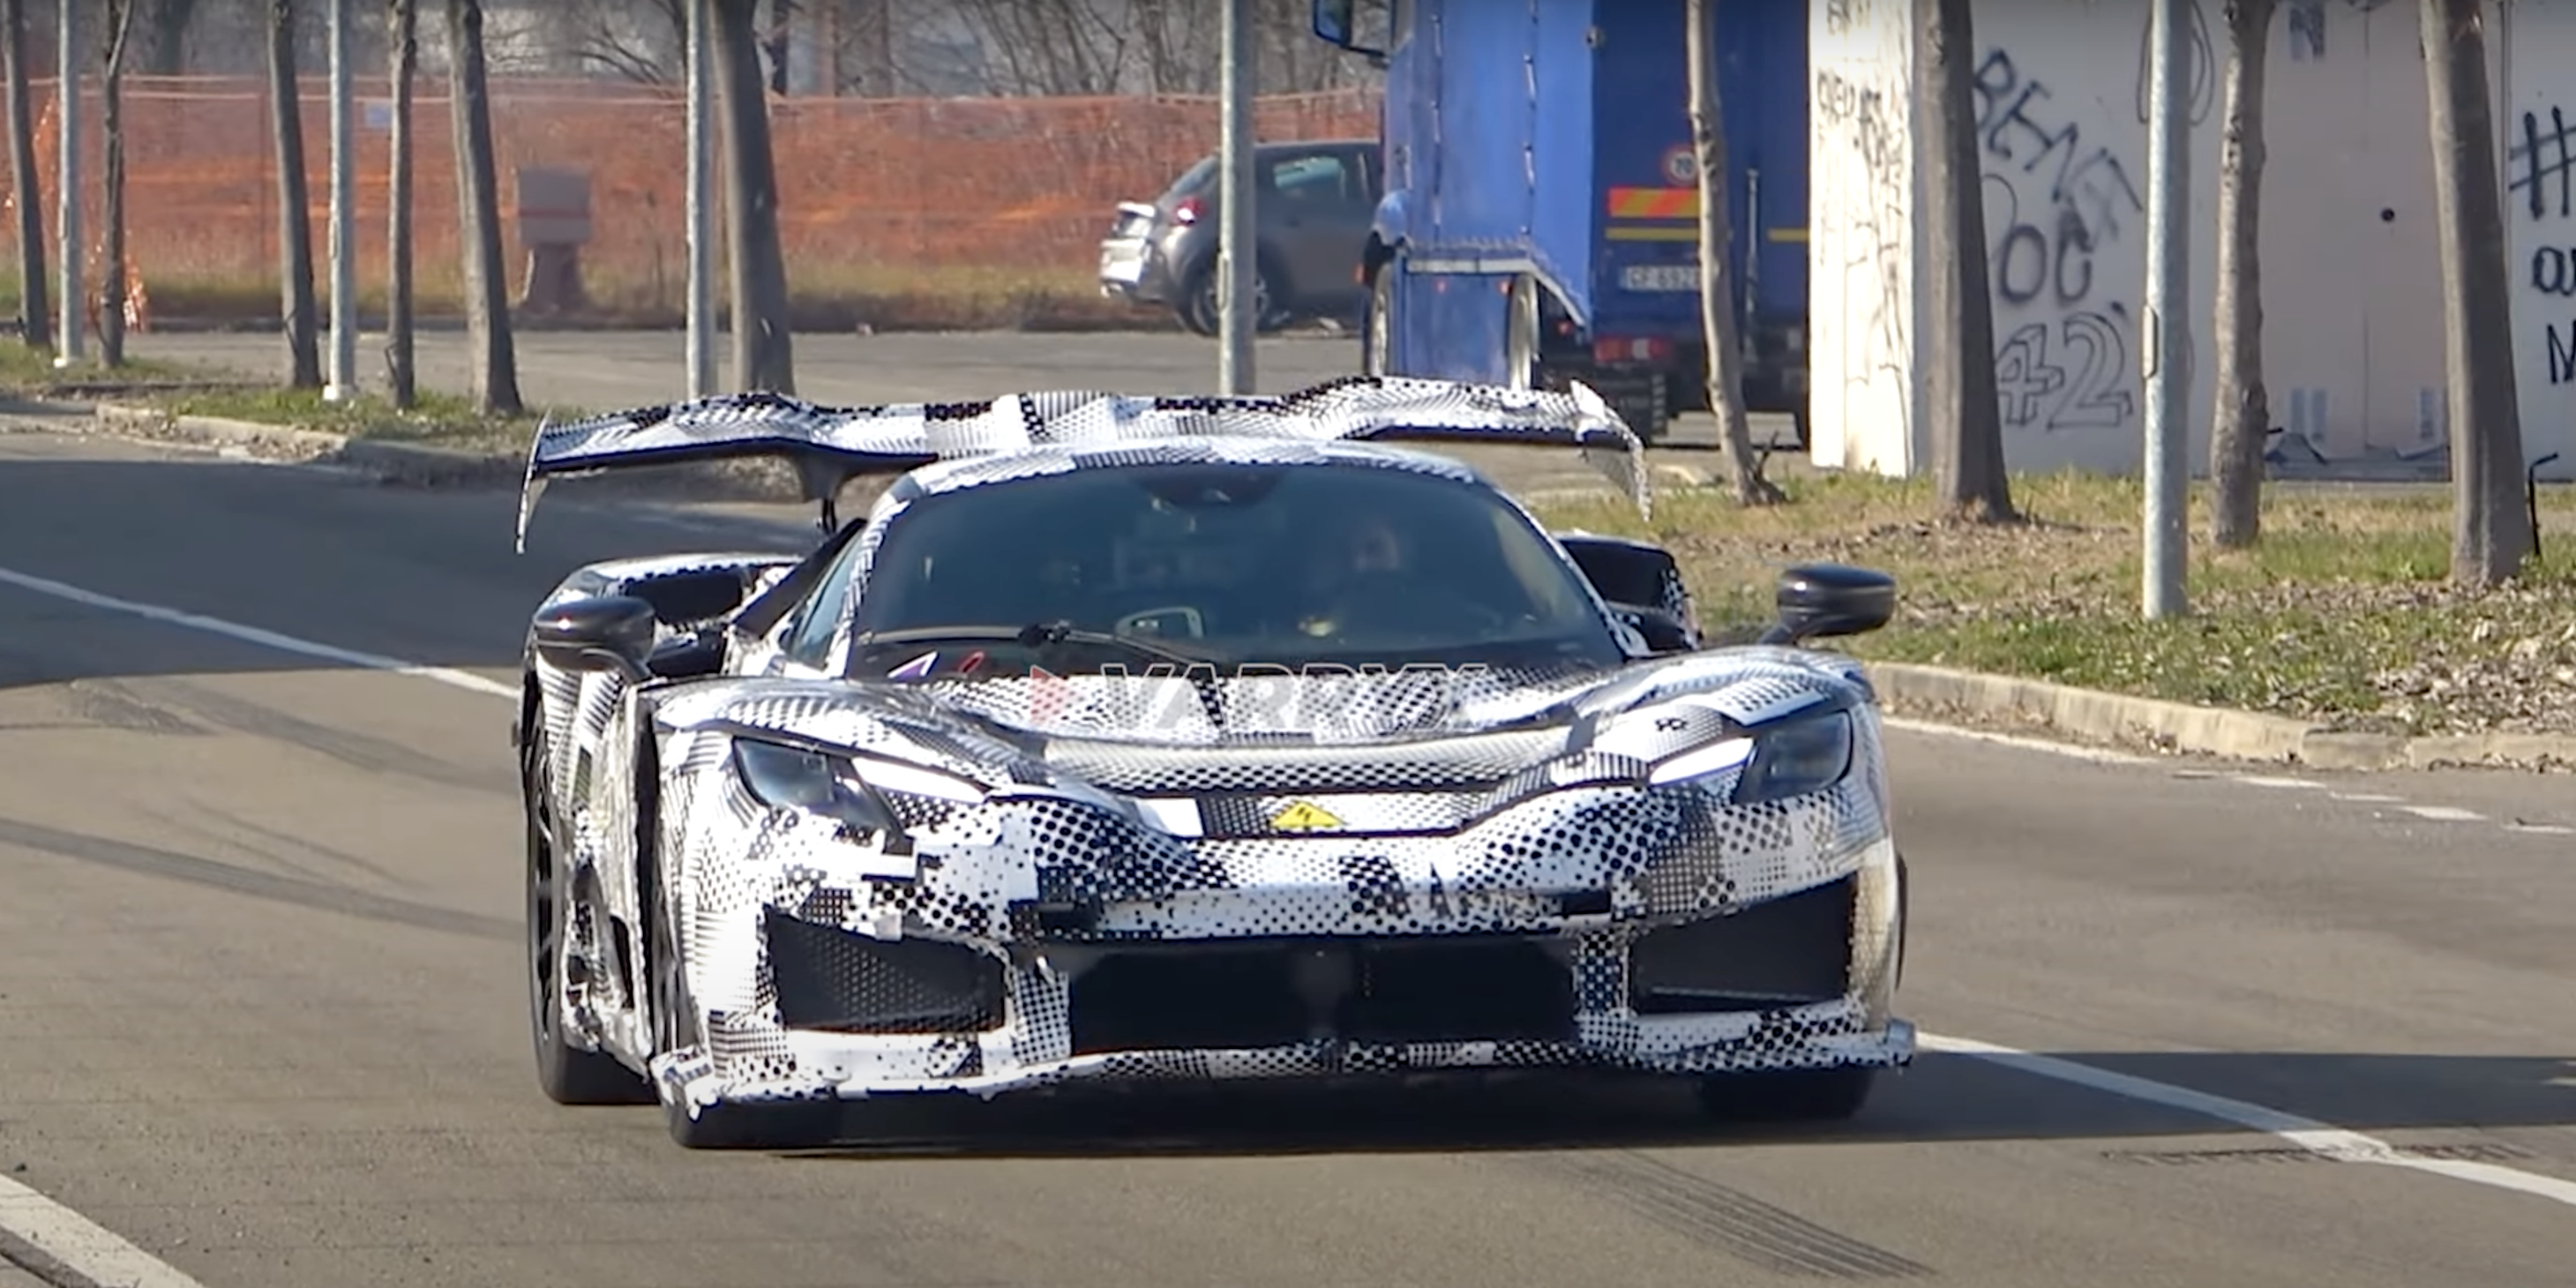 LaFerrari Successor Spied Testing With Giant Wing